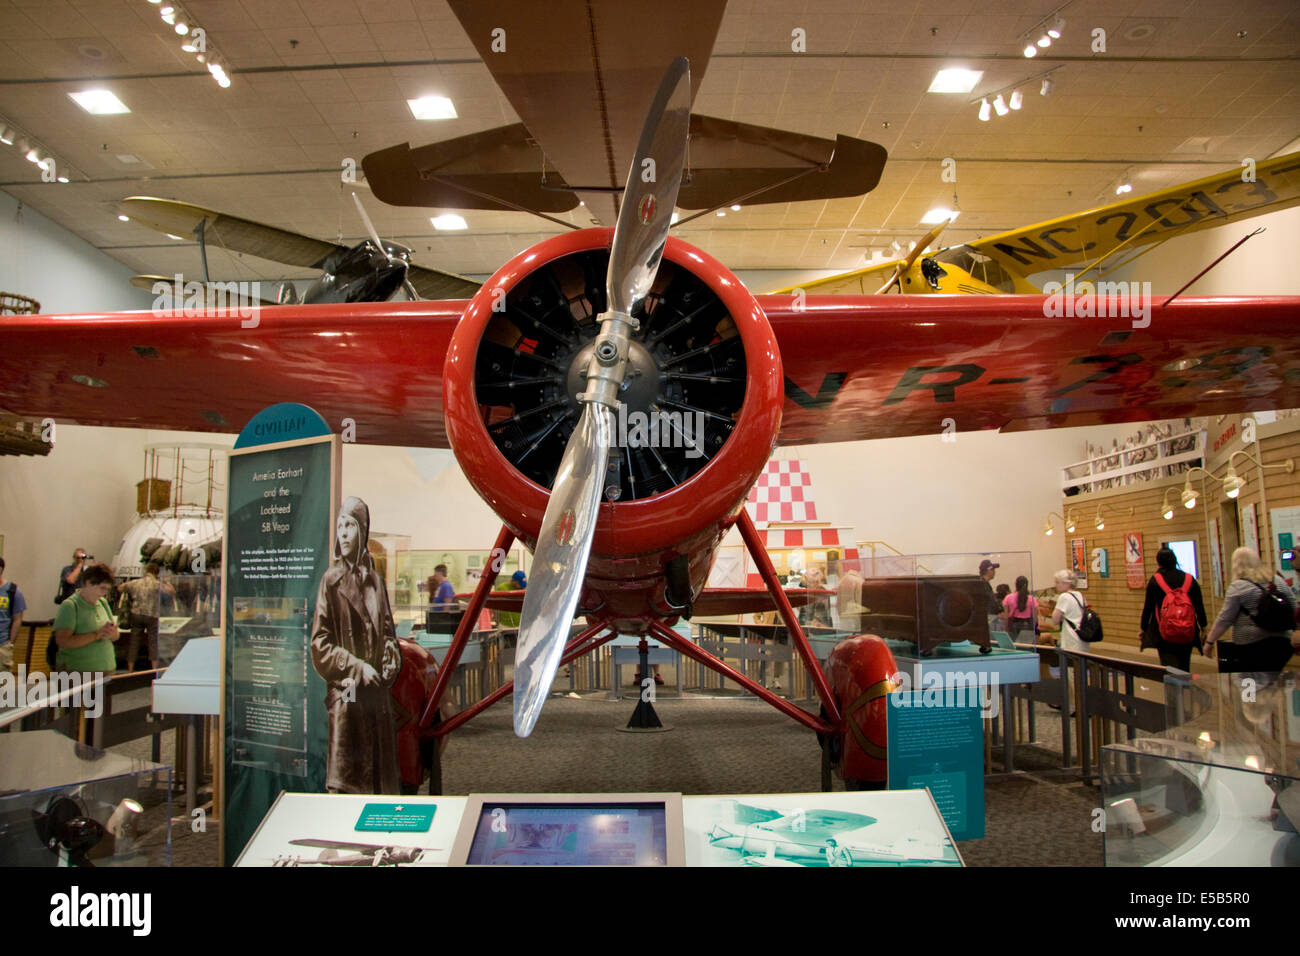 Amelia Earhart's red Lockheed 5B Vega, in which she became the first woman to make a solo crossing of the Atlantic. Stock Photo